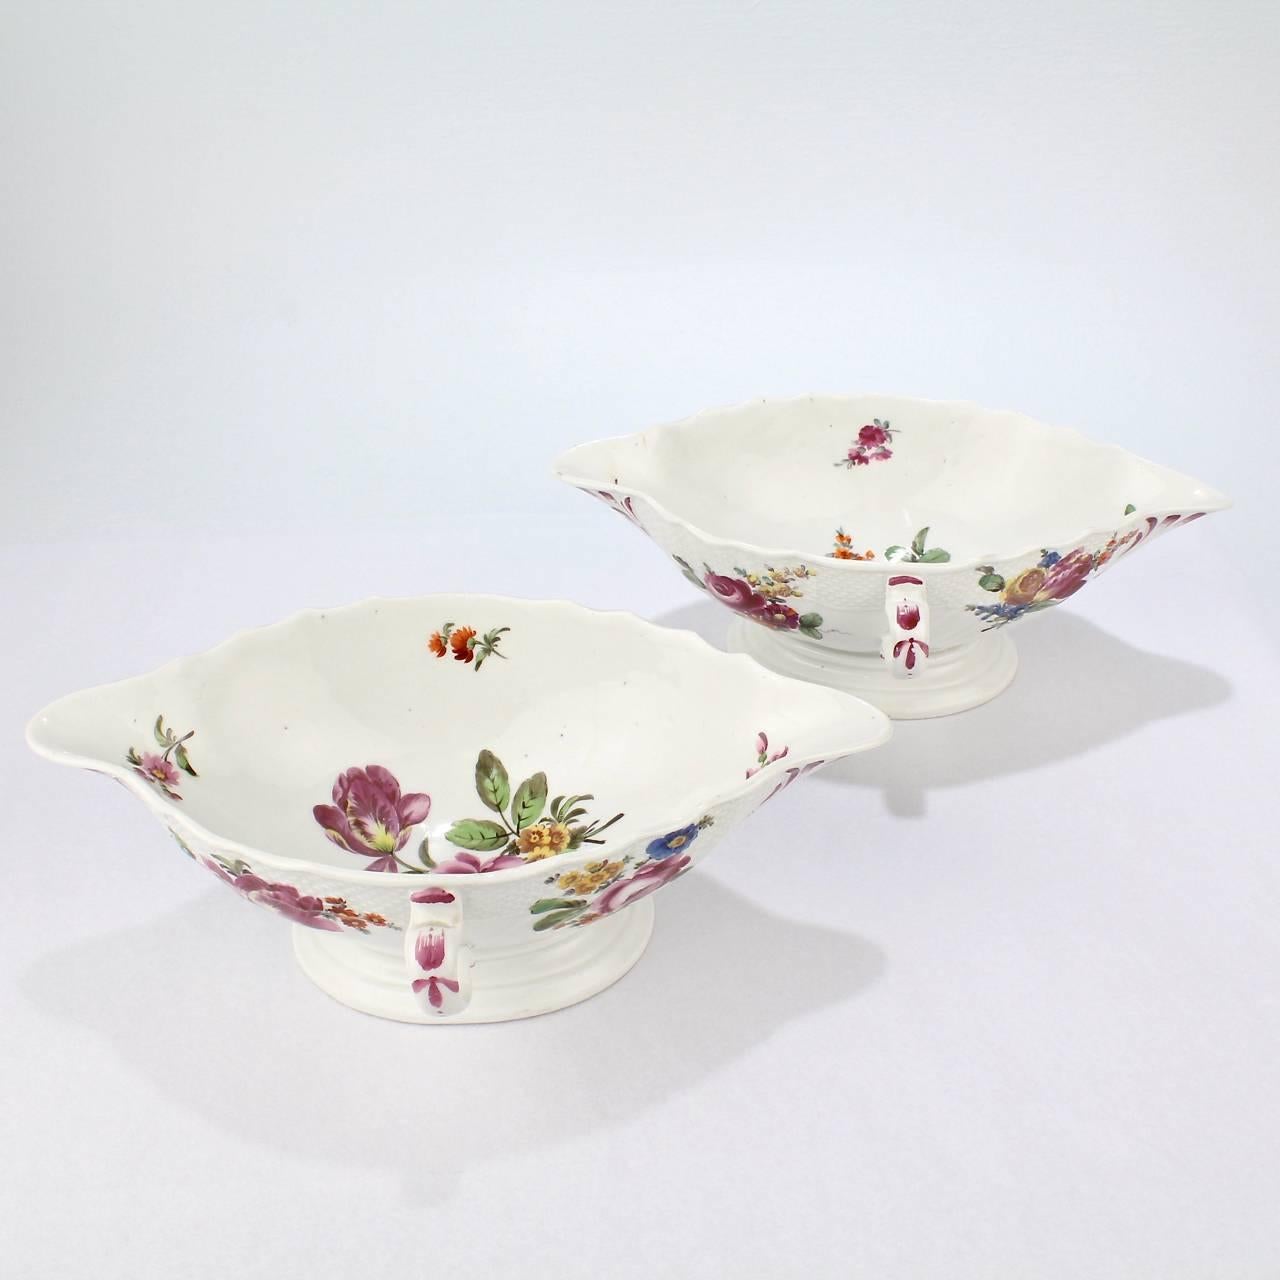 Austrian Pair of Antique 18th Century Imperial Vienna Porcelain Sauce or Gravy Boats For Sale